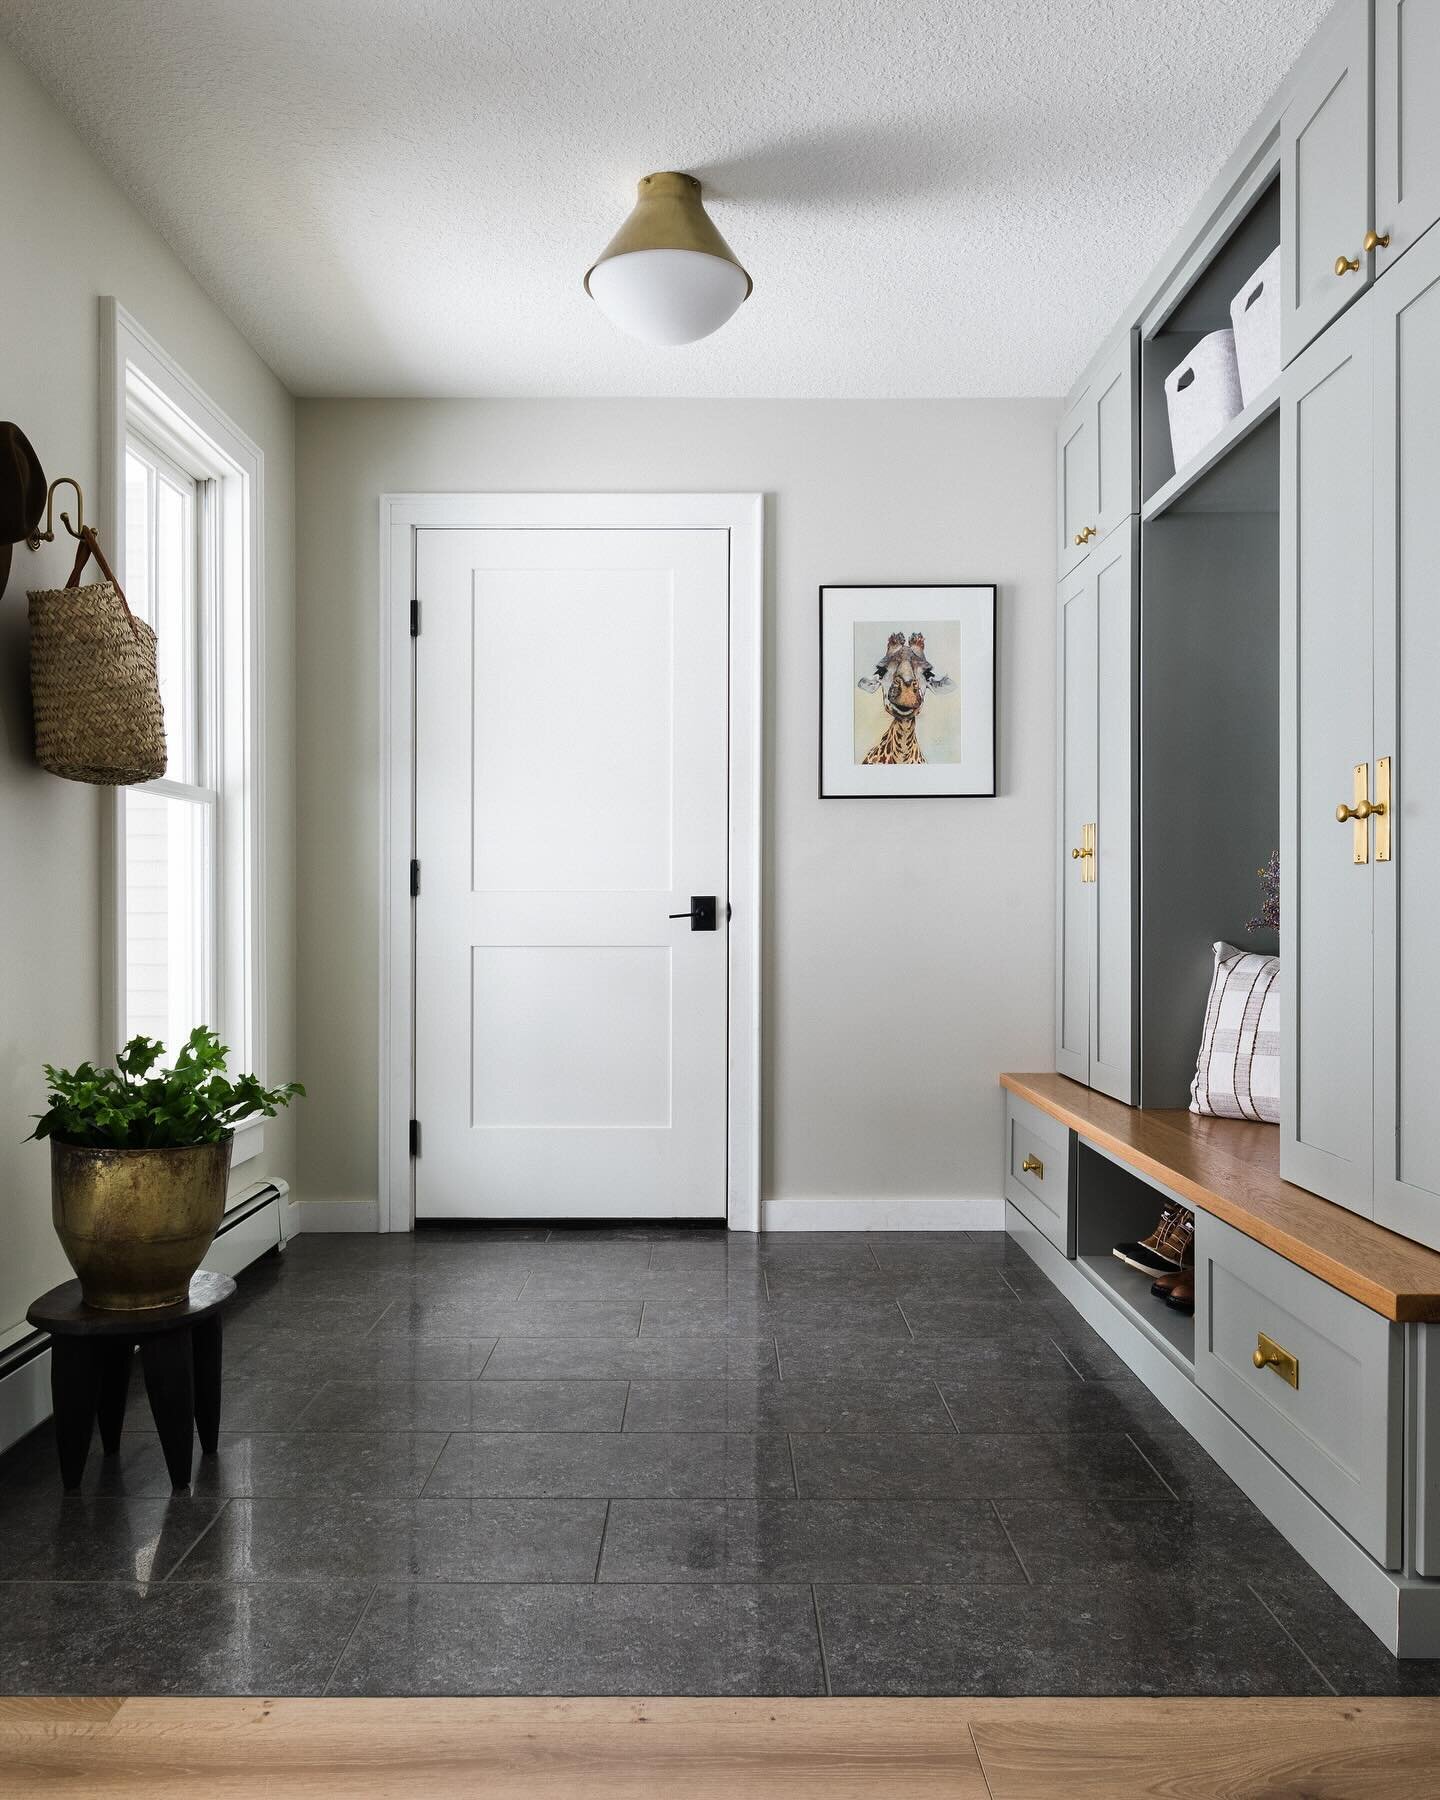 Office turned mudroom for this northern Michigan home. 

pic . @margaretfrancesphoto 
#boynecove